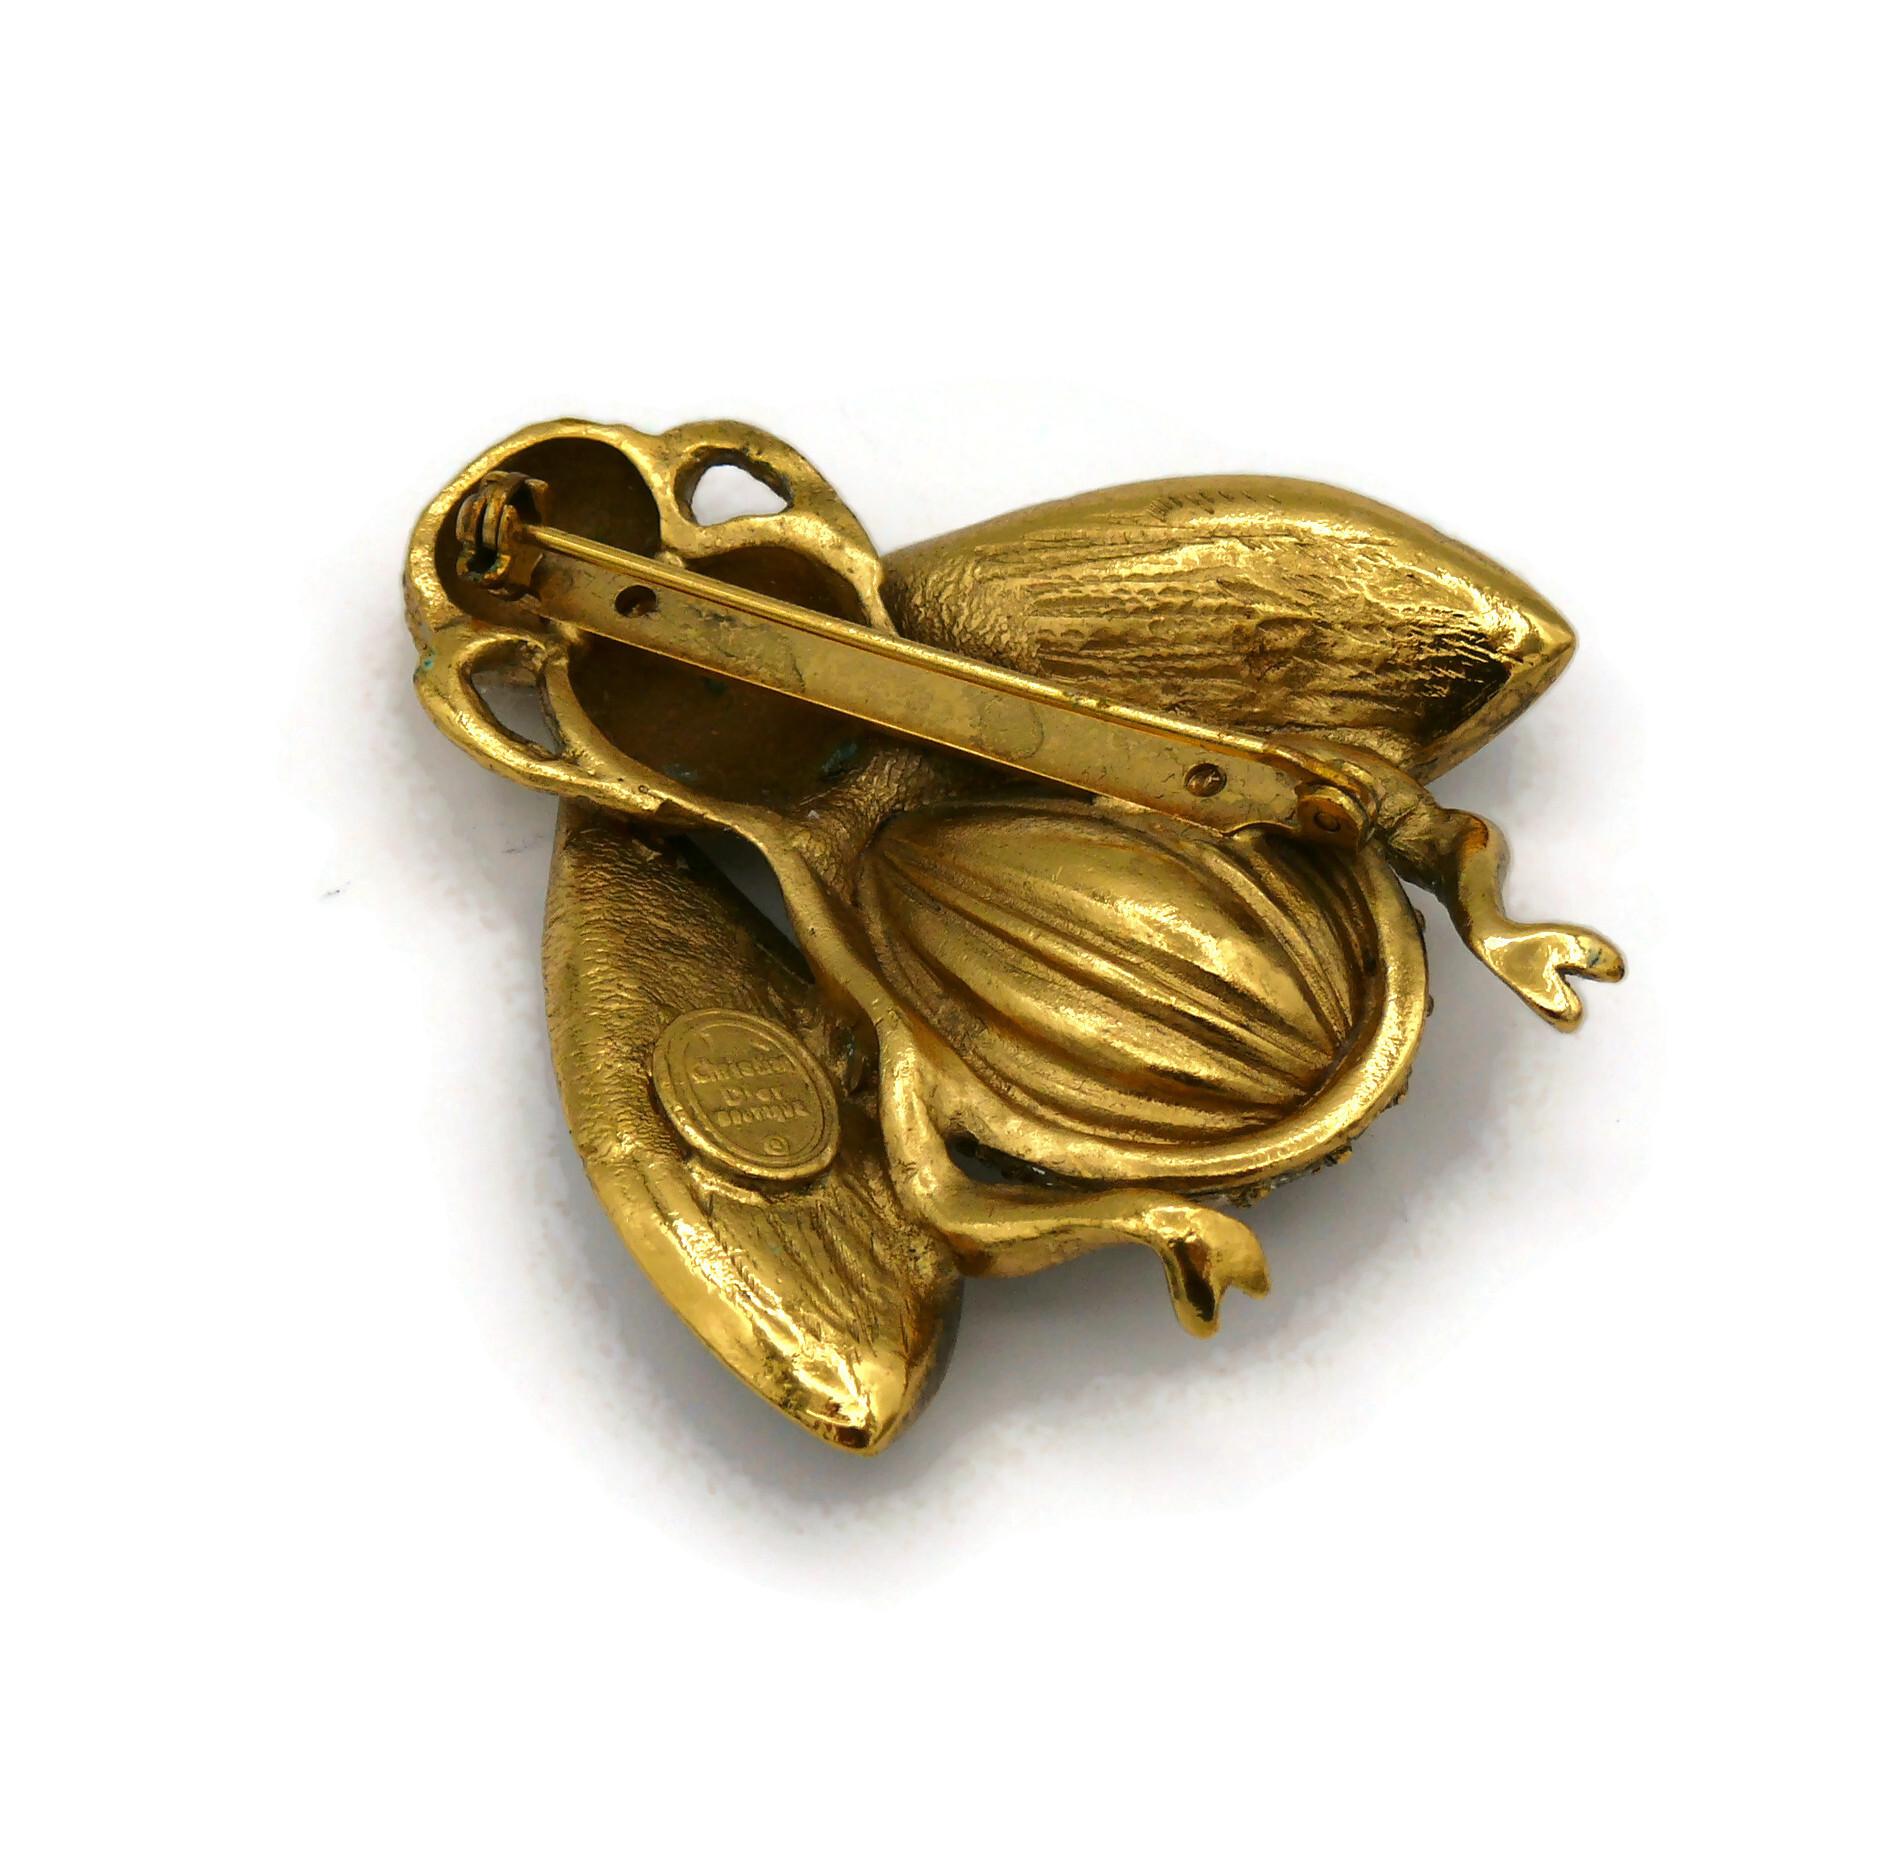 CHRISTIAN DIOR Vintage Iconic Jewelled Bee Brooch 4